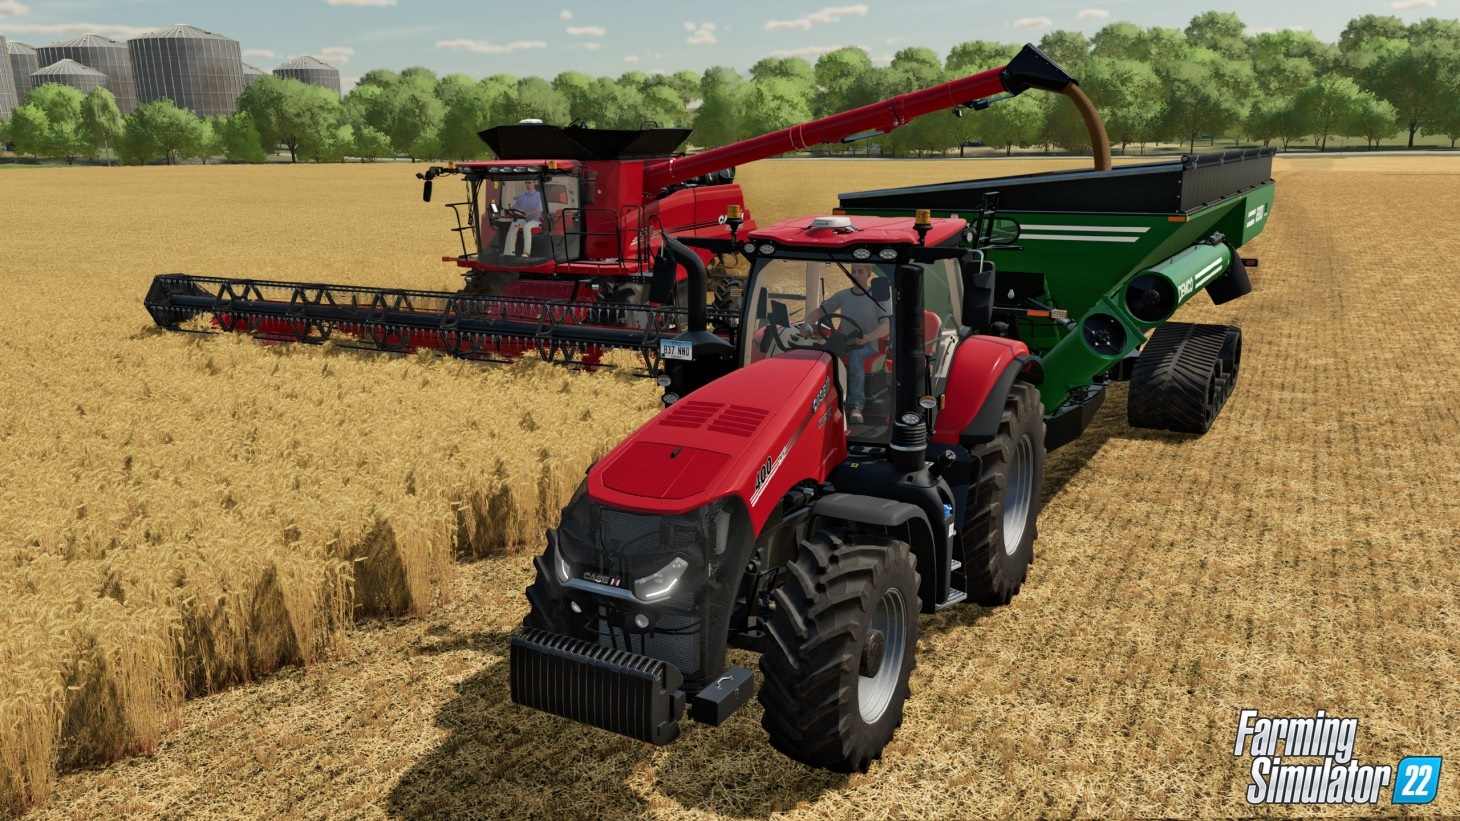 Farming Simulator 22 is available for free on the Epic Games Store